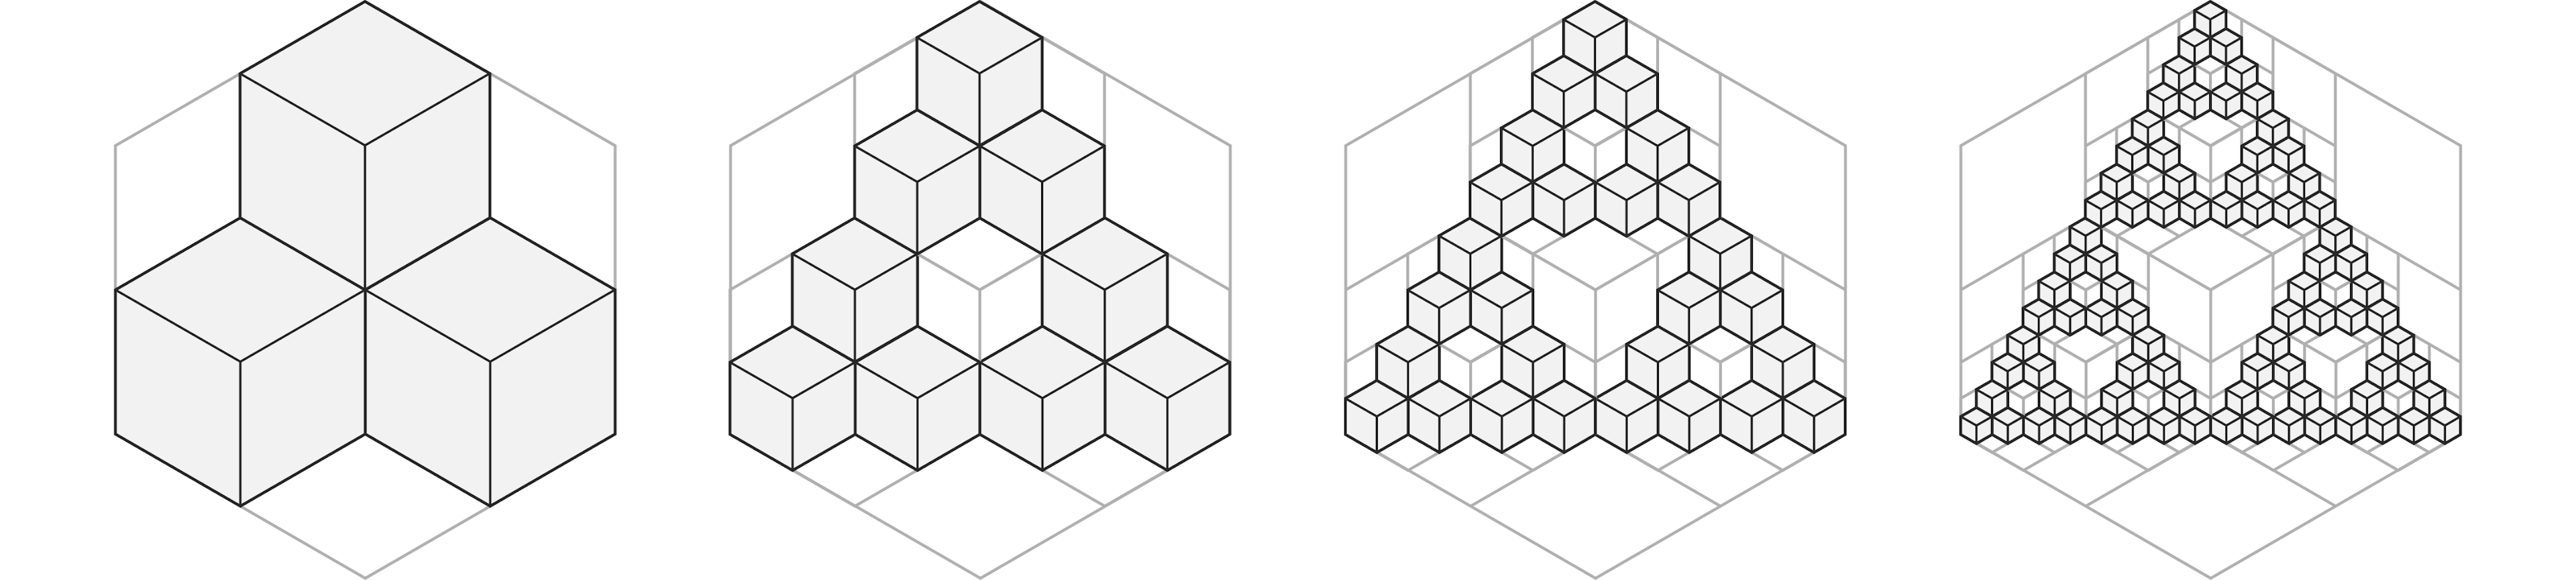 Figure 1 - from level 1 to 4 of cube subdivisions